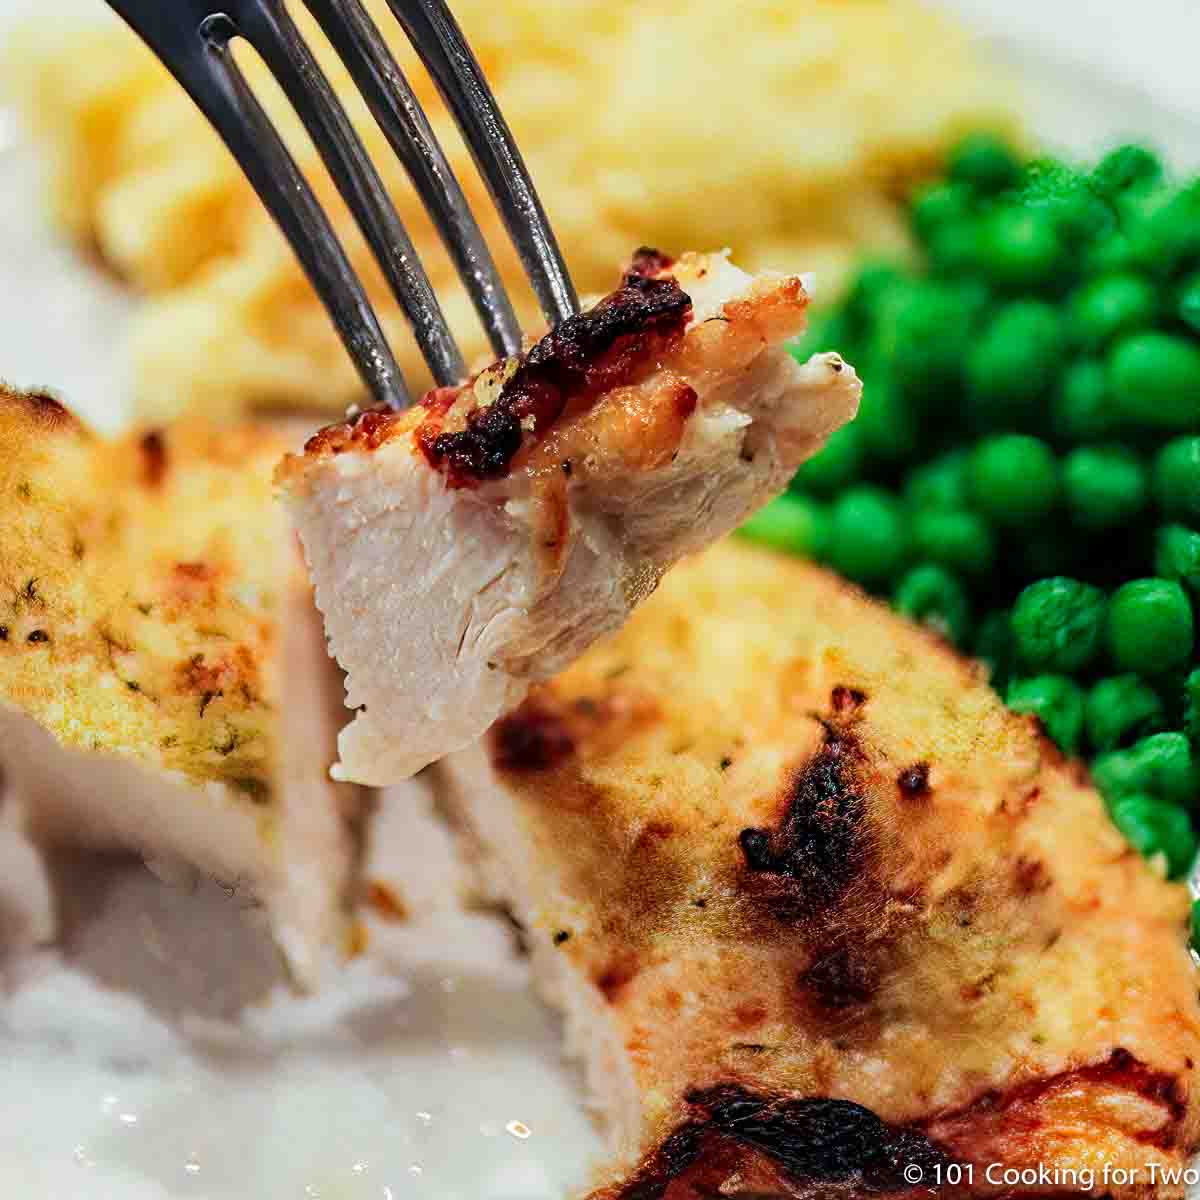 Parmesan Baked Chicken Breast on a fork